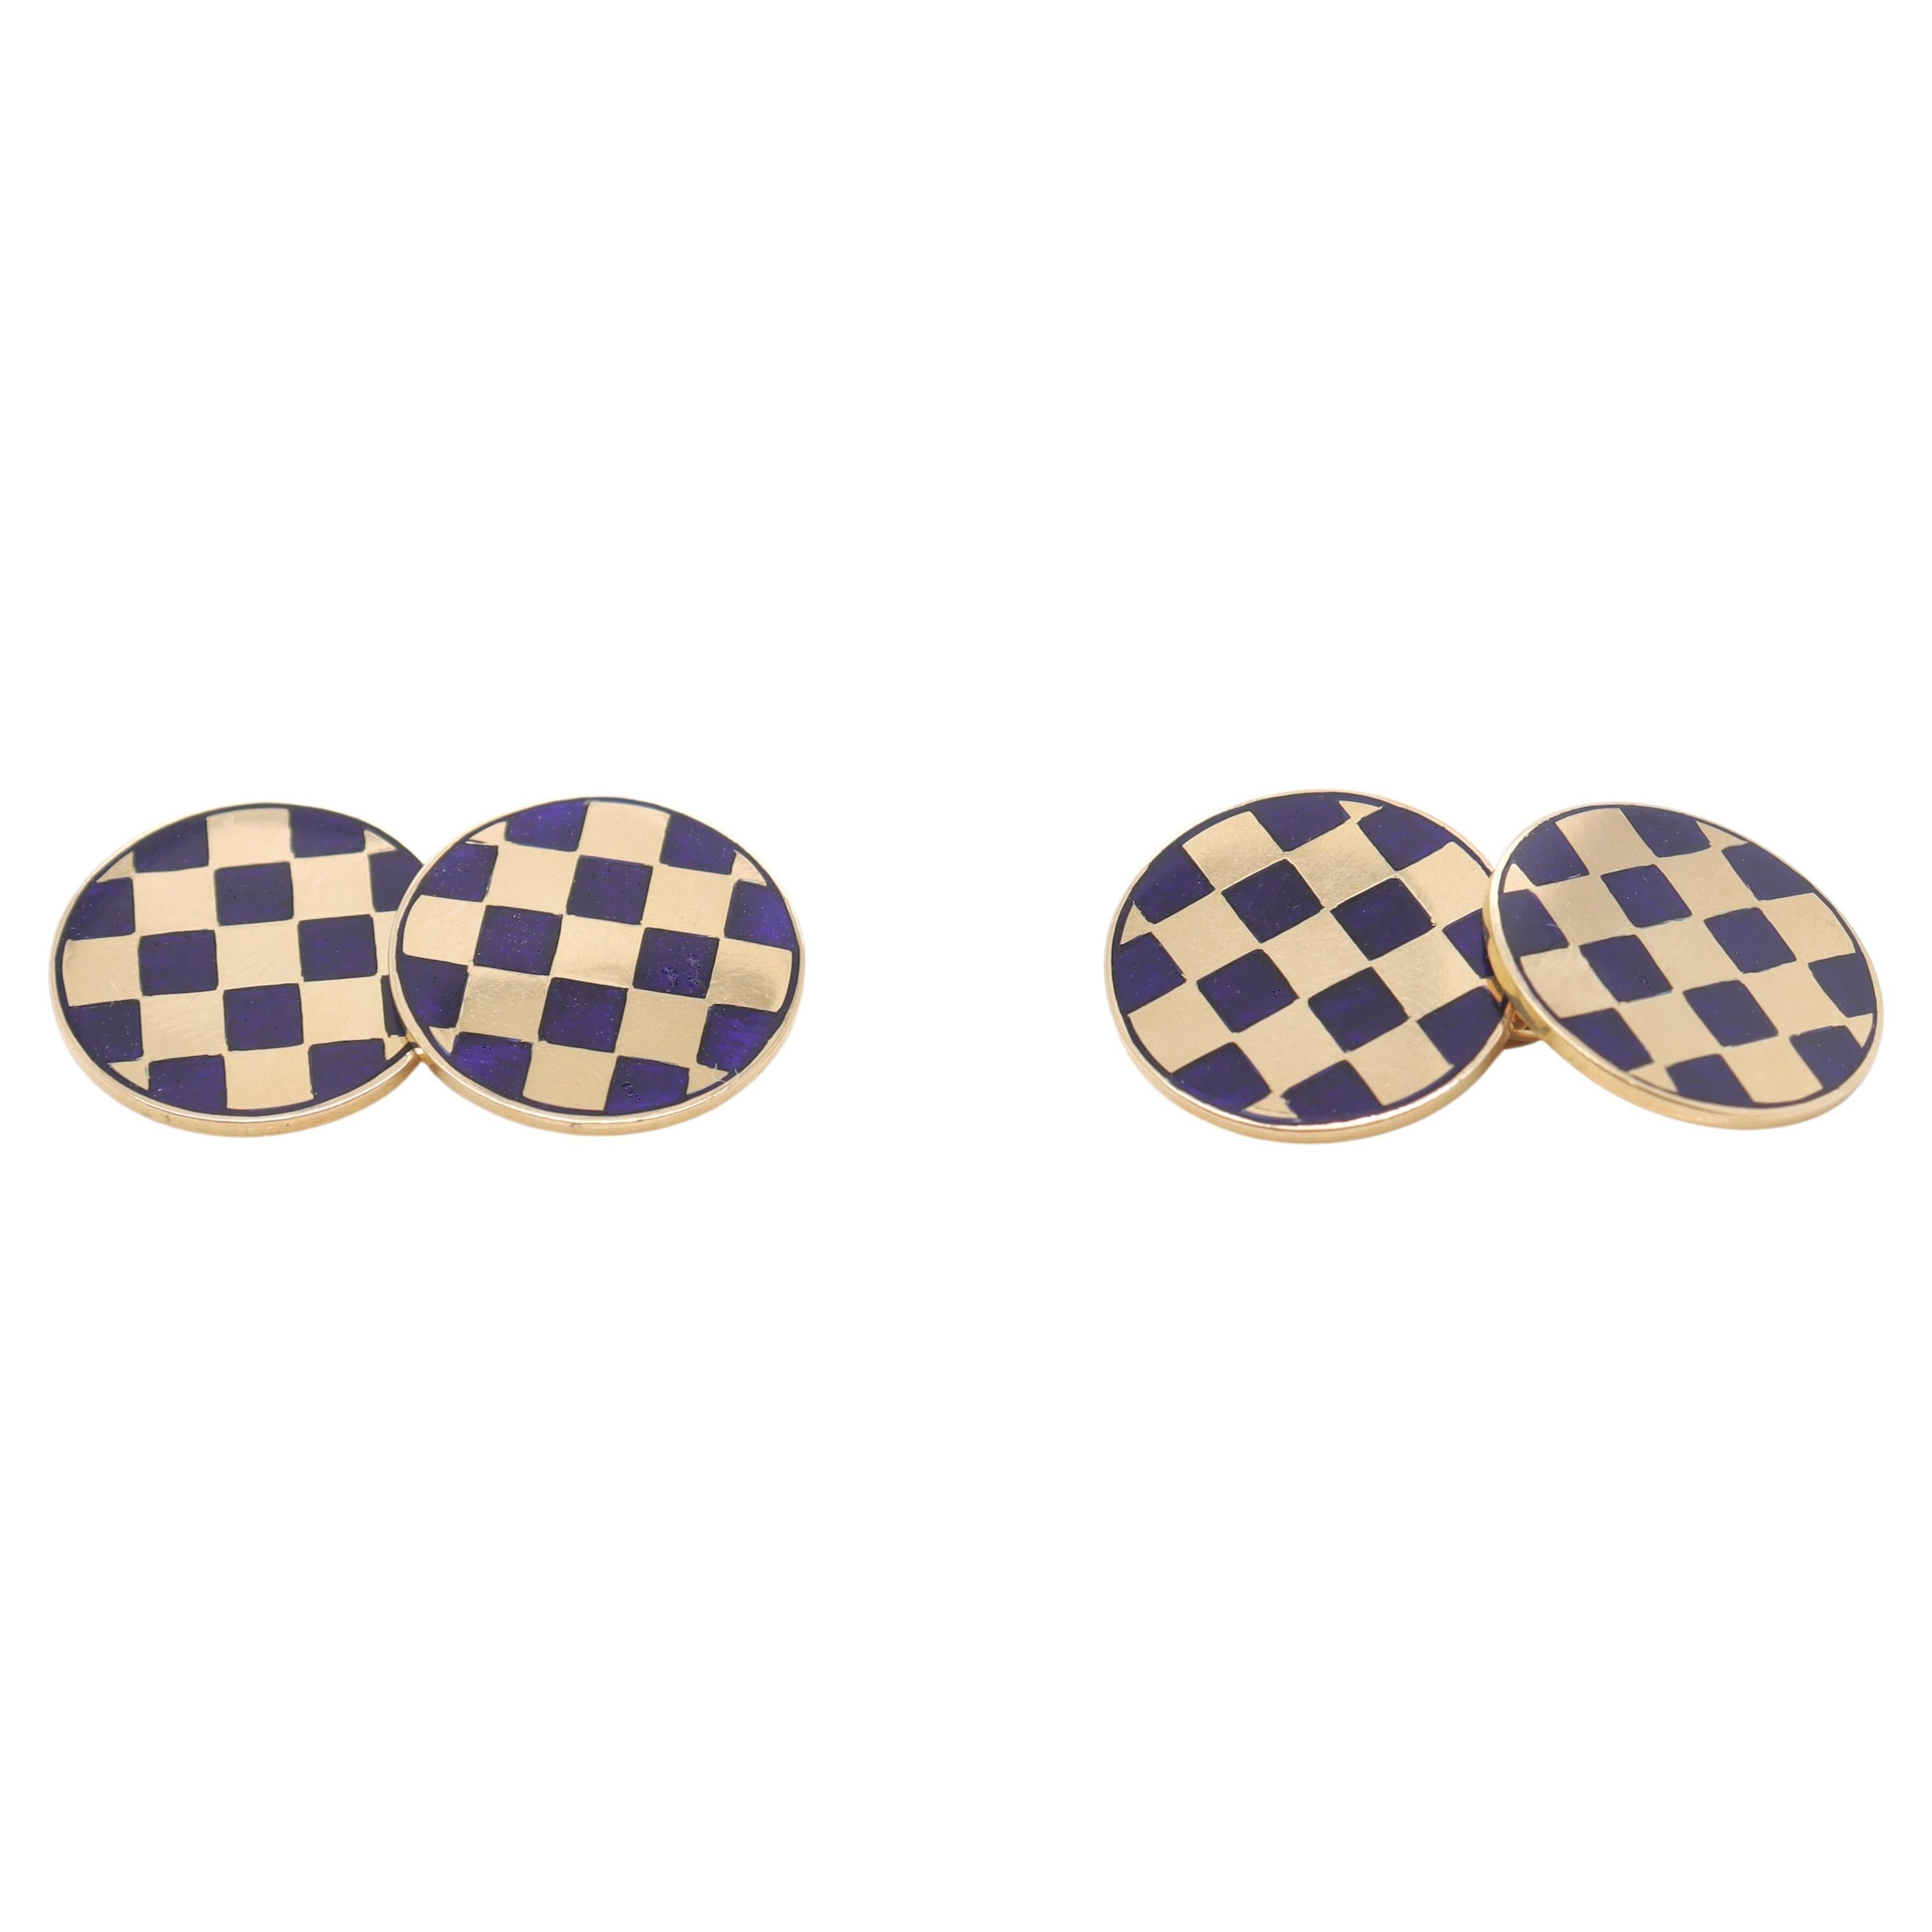 A fine pair of vintage cufflinks.

In 14 karat yellow gold with a blue enameled checkerboard pattern.

Connected with oval links.

Simply a wonderful pair of cufflinks for the well-dressed man!

Date:
20th Century

Overall Condition:
They are in